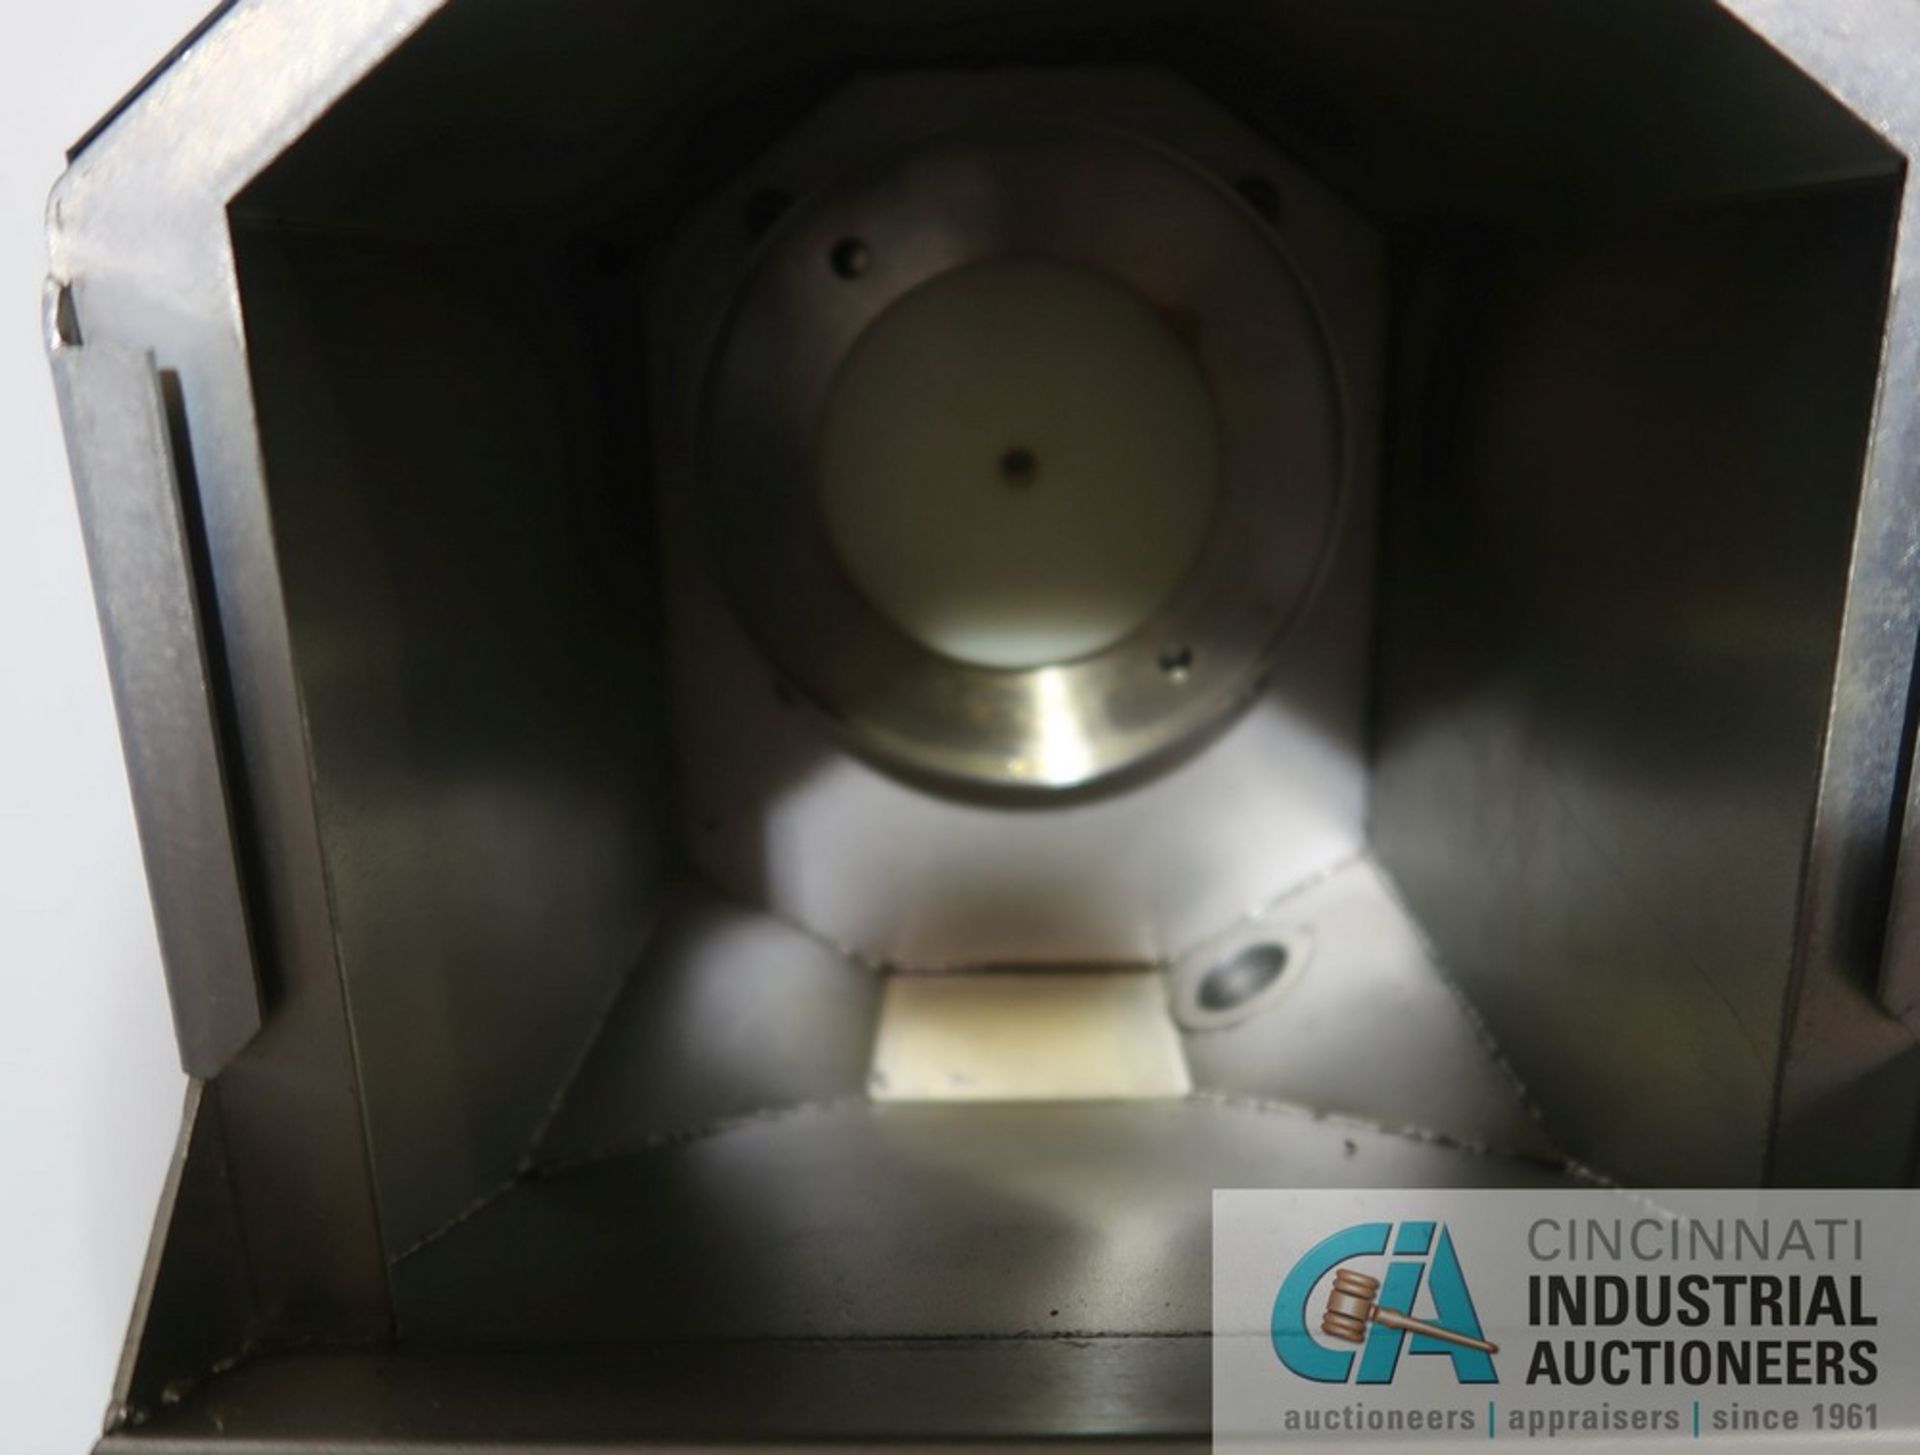 HAAS MODEL SL-30T CNC TURNING CENTER, S/N 64173, (NEW 6/2001), 10" THREE-JAW CHUCK, 12-POSITION - Image 11 of 20